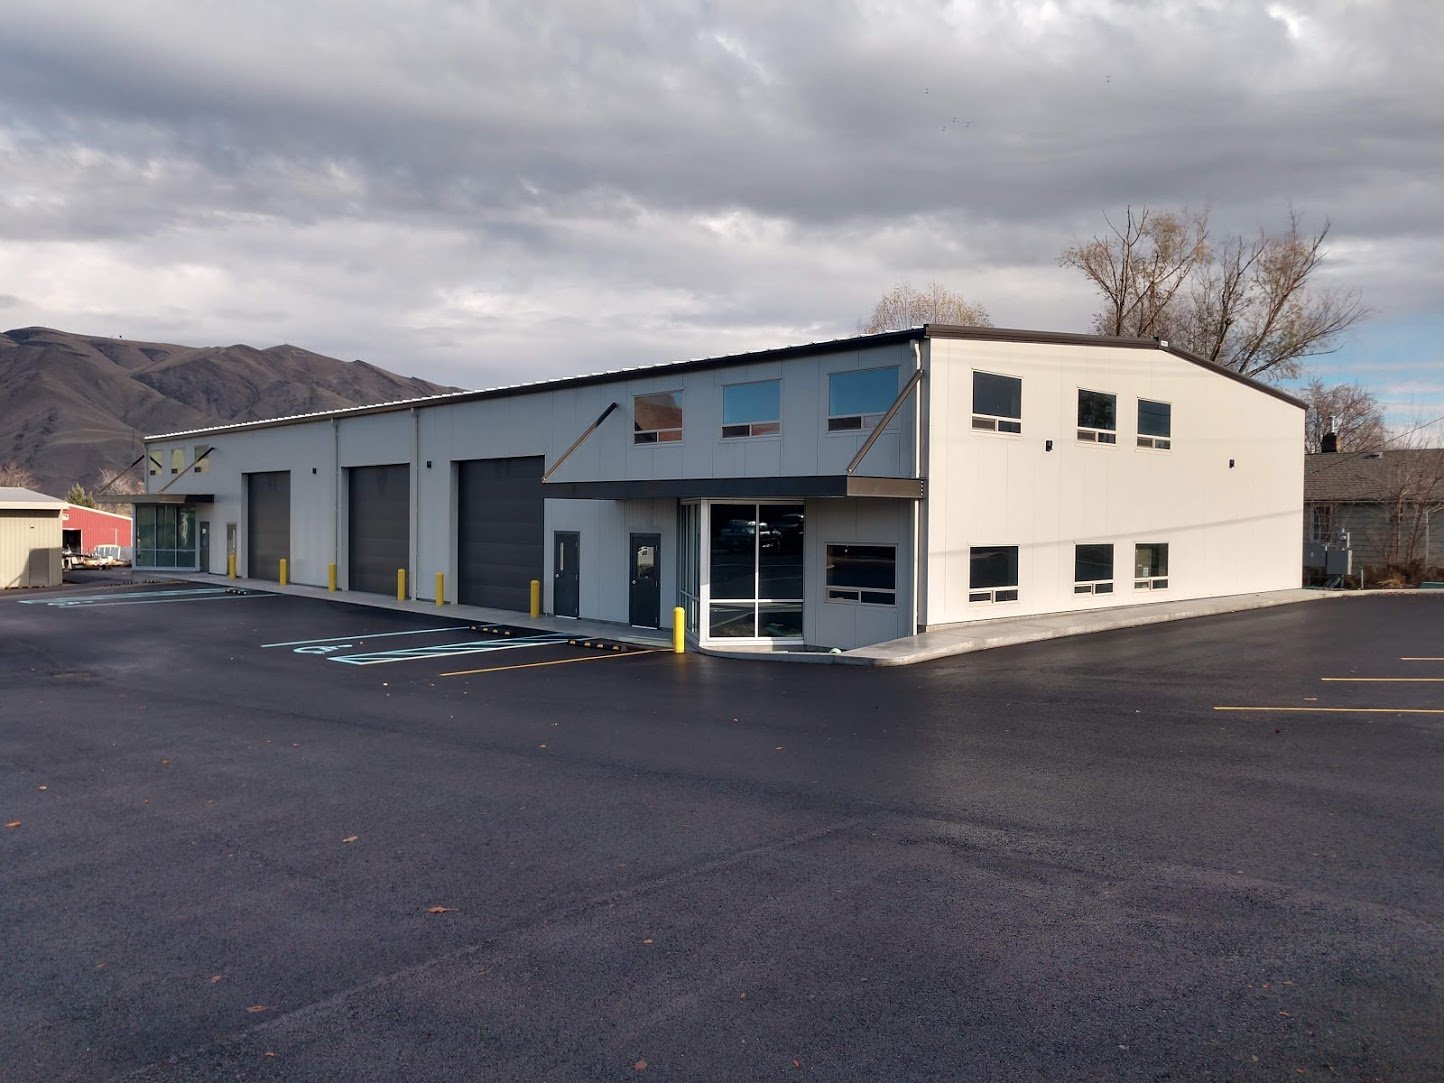 Pre engineered steel building with insulated metal panels in Clarkston Washington. Offices with store front entrances and plenty of natural lighting.